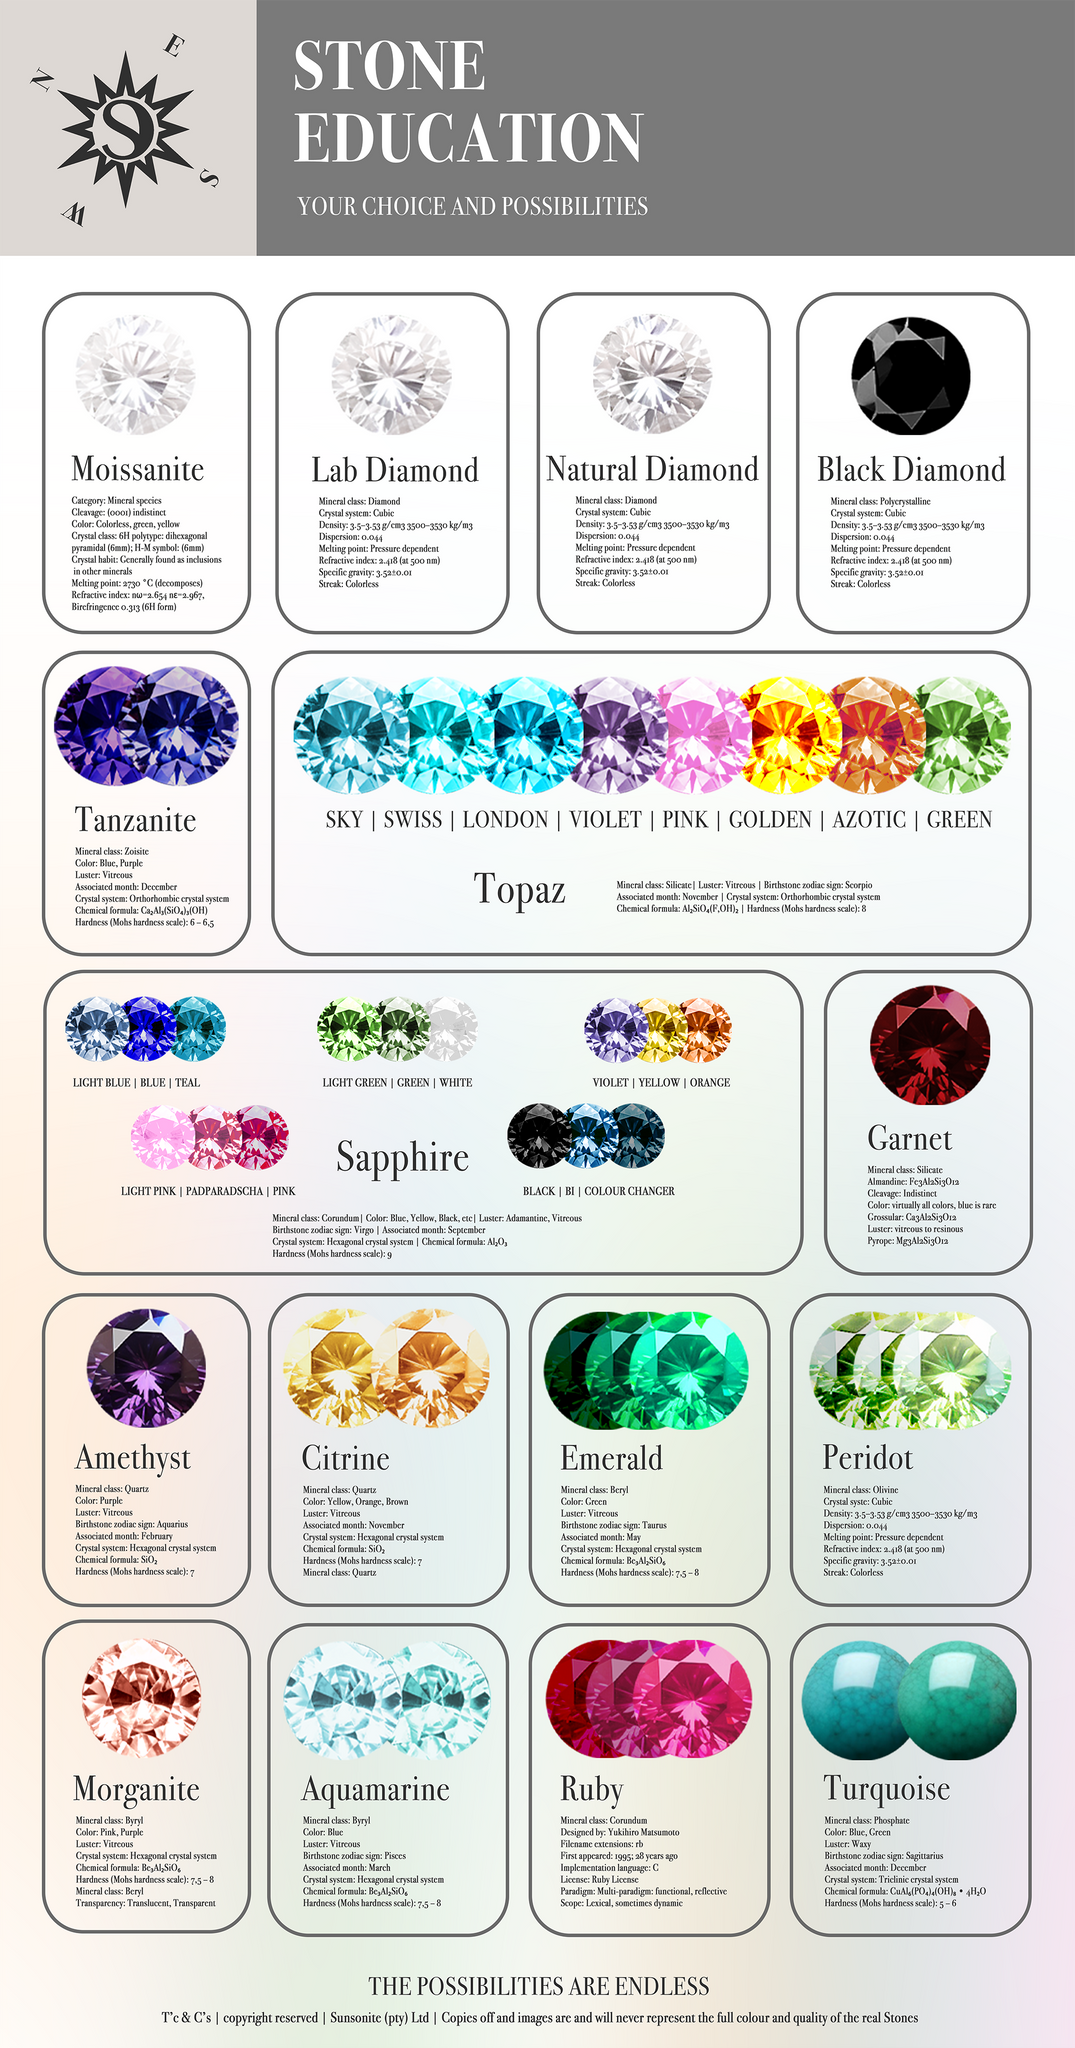 Sunsonite Jewellery Boutique gemstone selection and education sheet